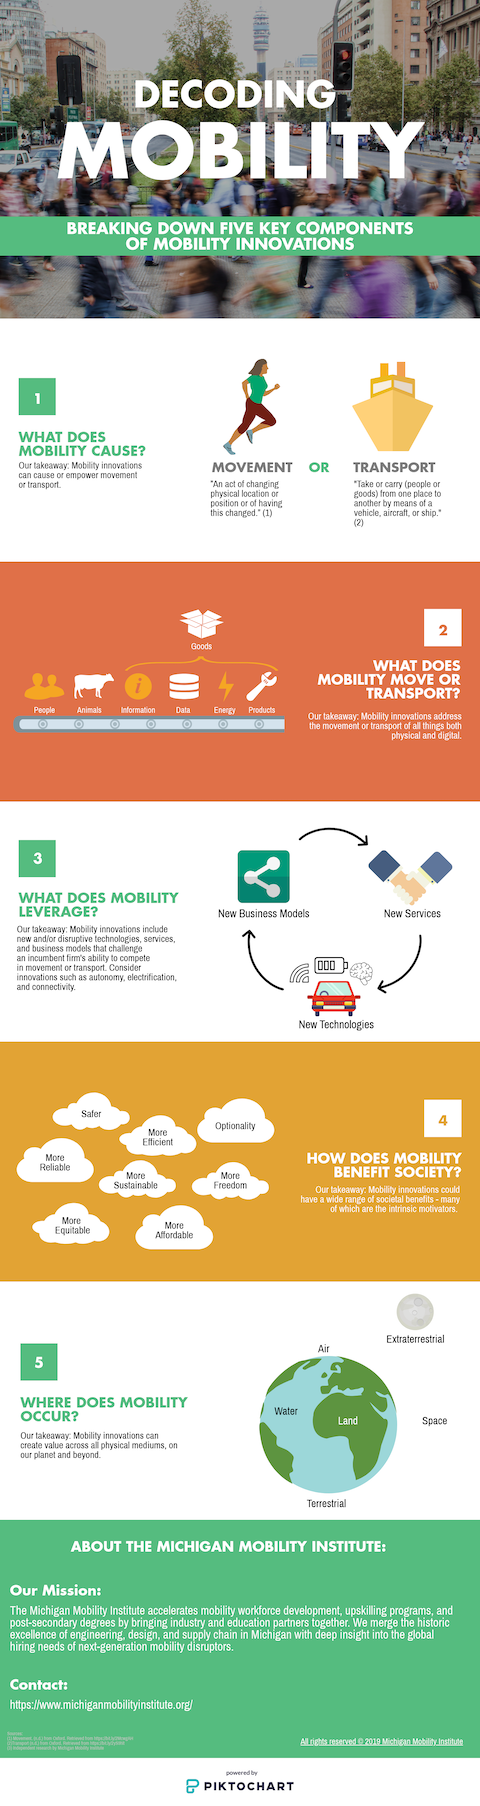 Decoding Mobility - Michigan Mobility Institute Mini.png